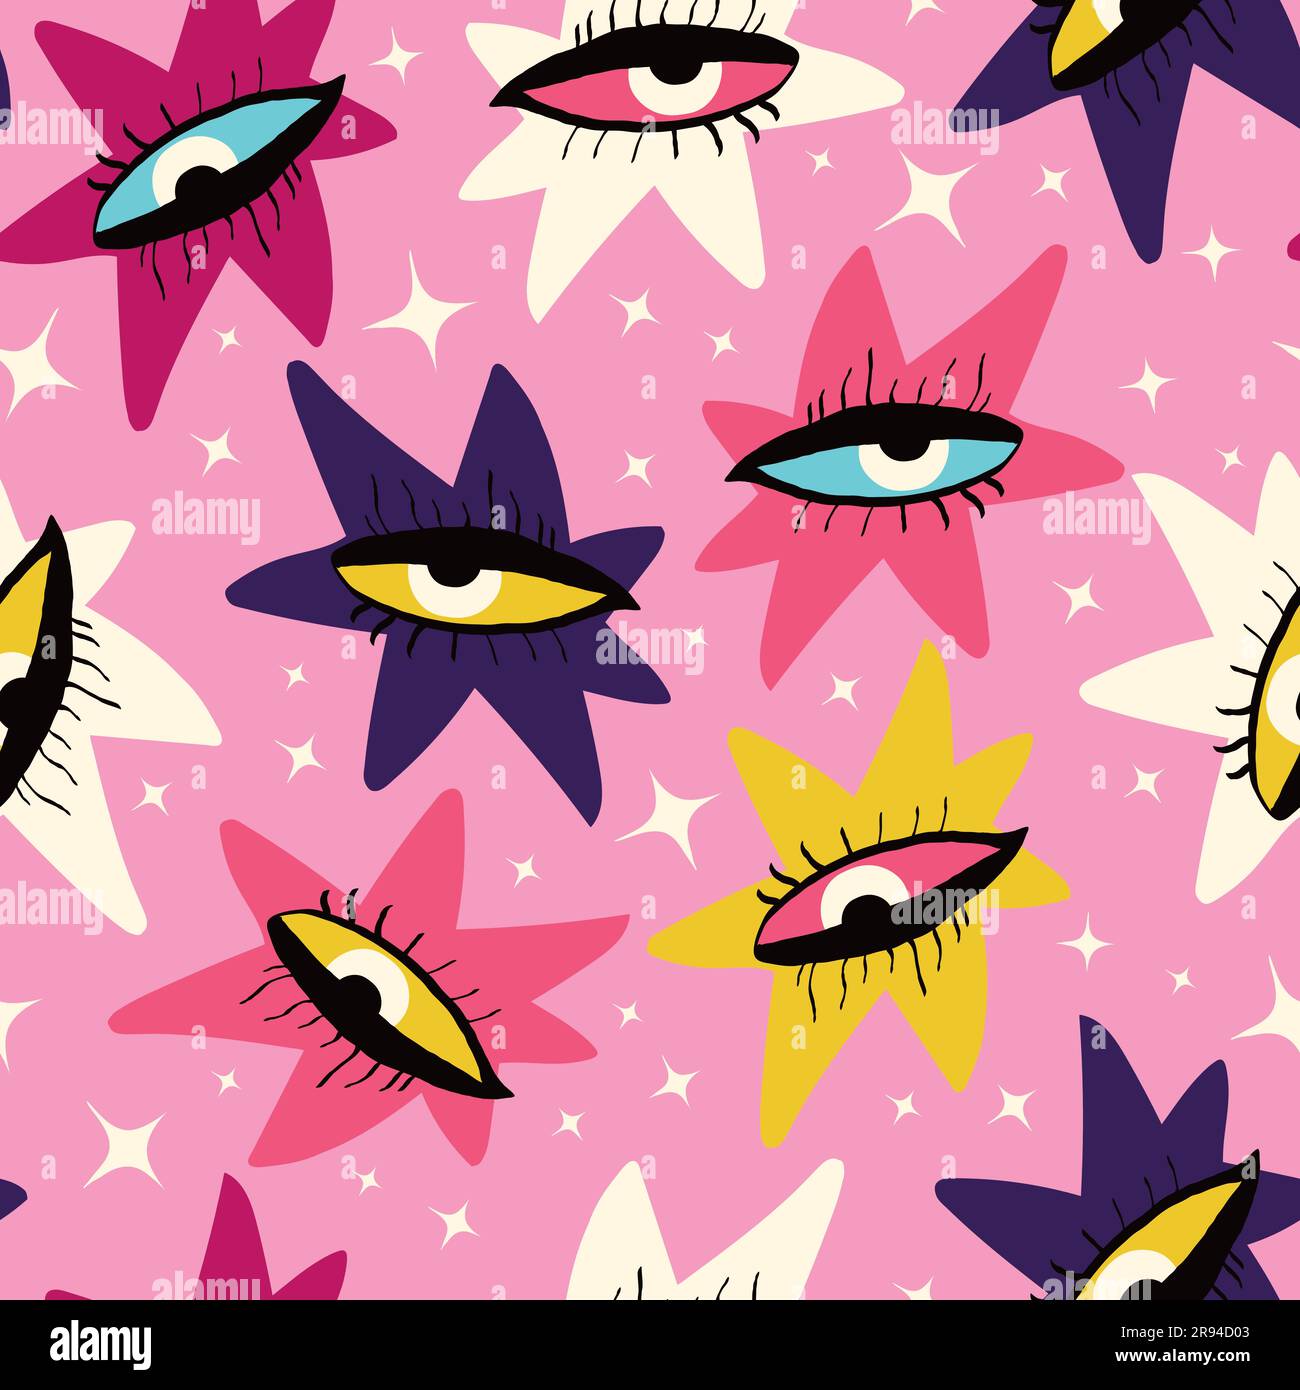 Pink Vibrant Feminine Aesthetic pattern with abstract painted faces and ...